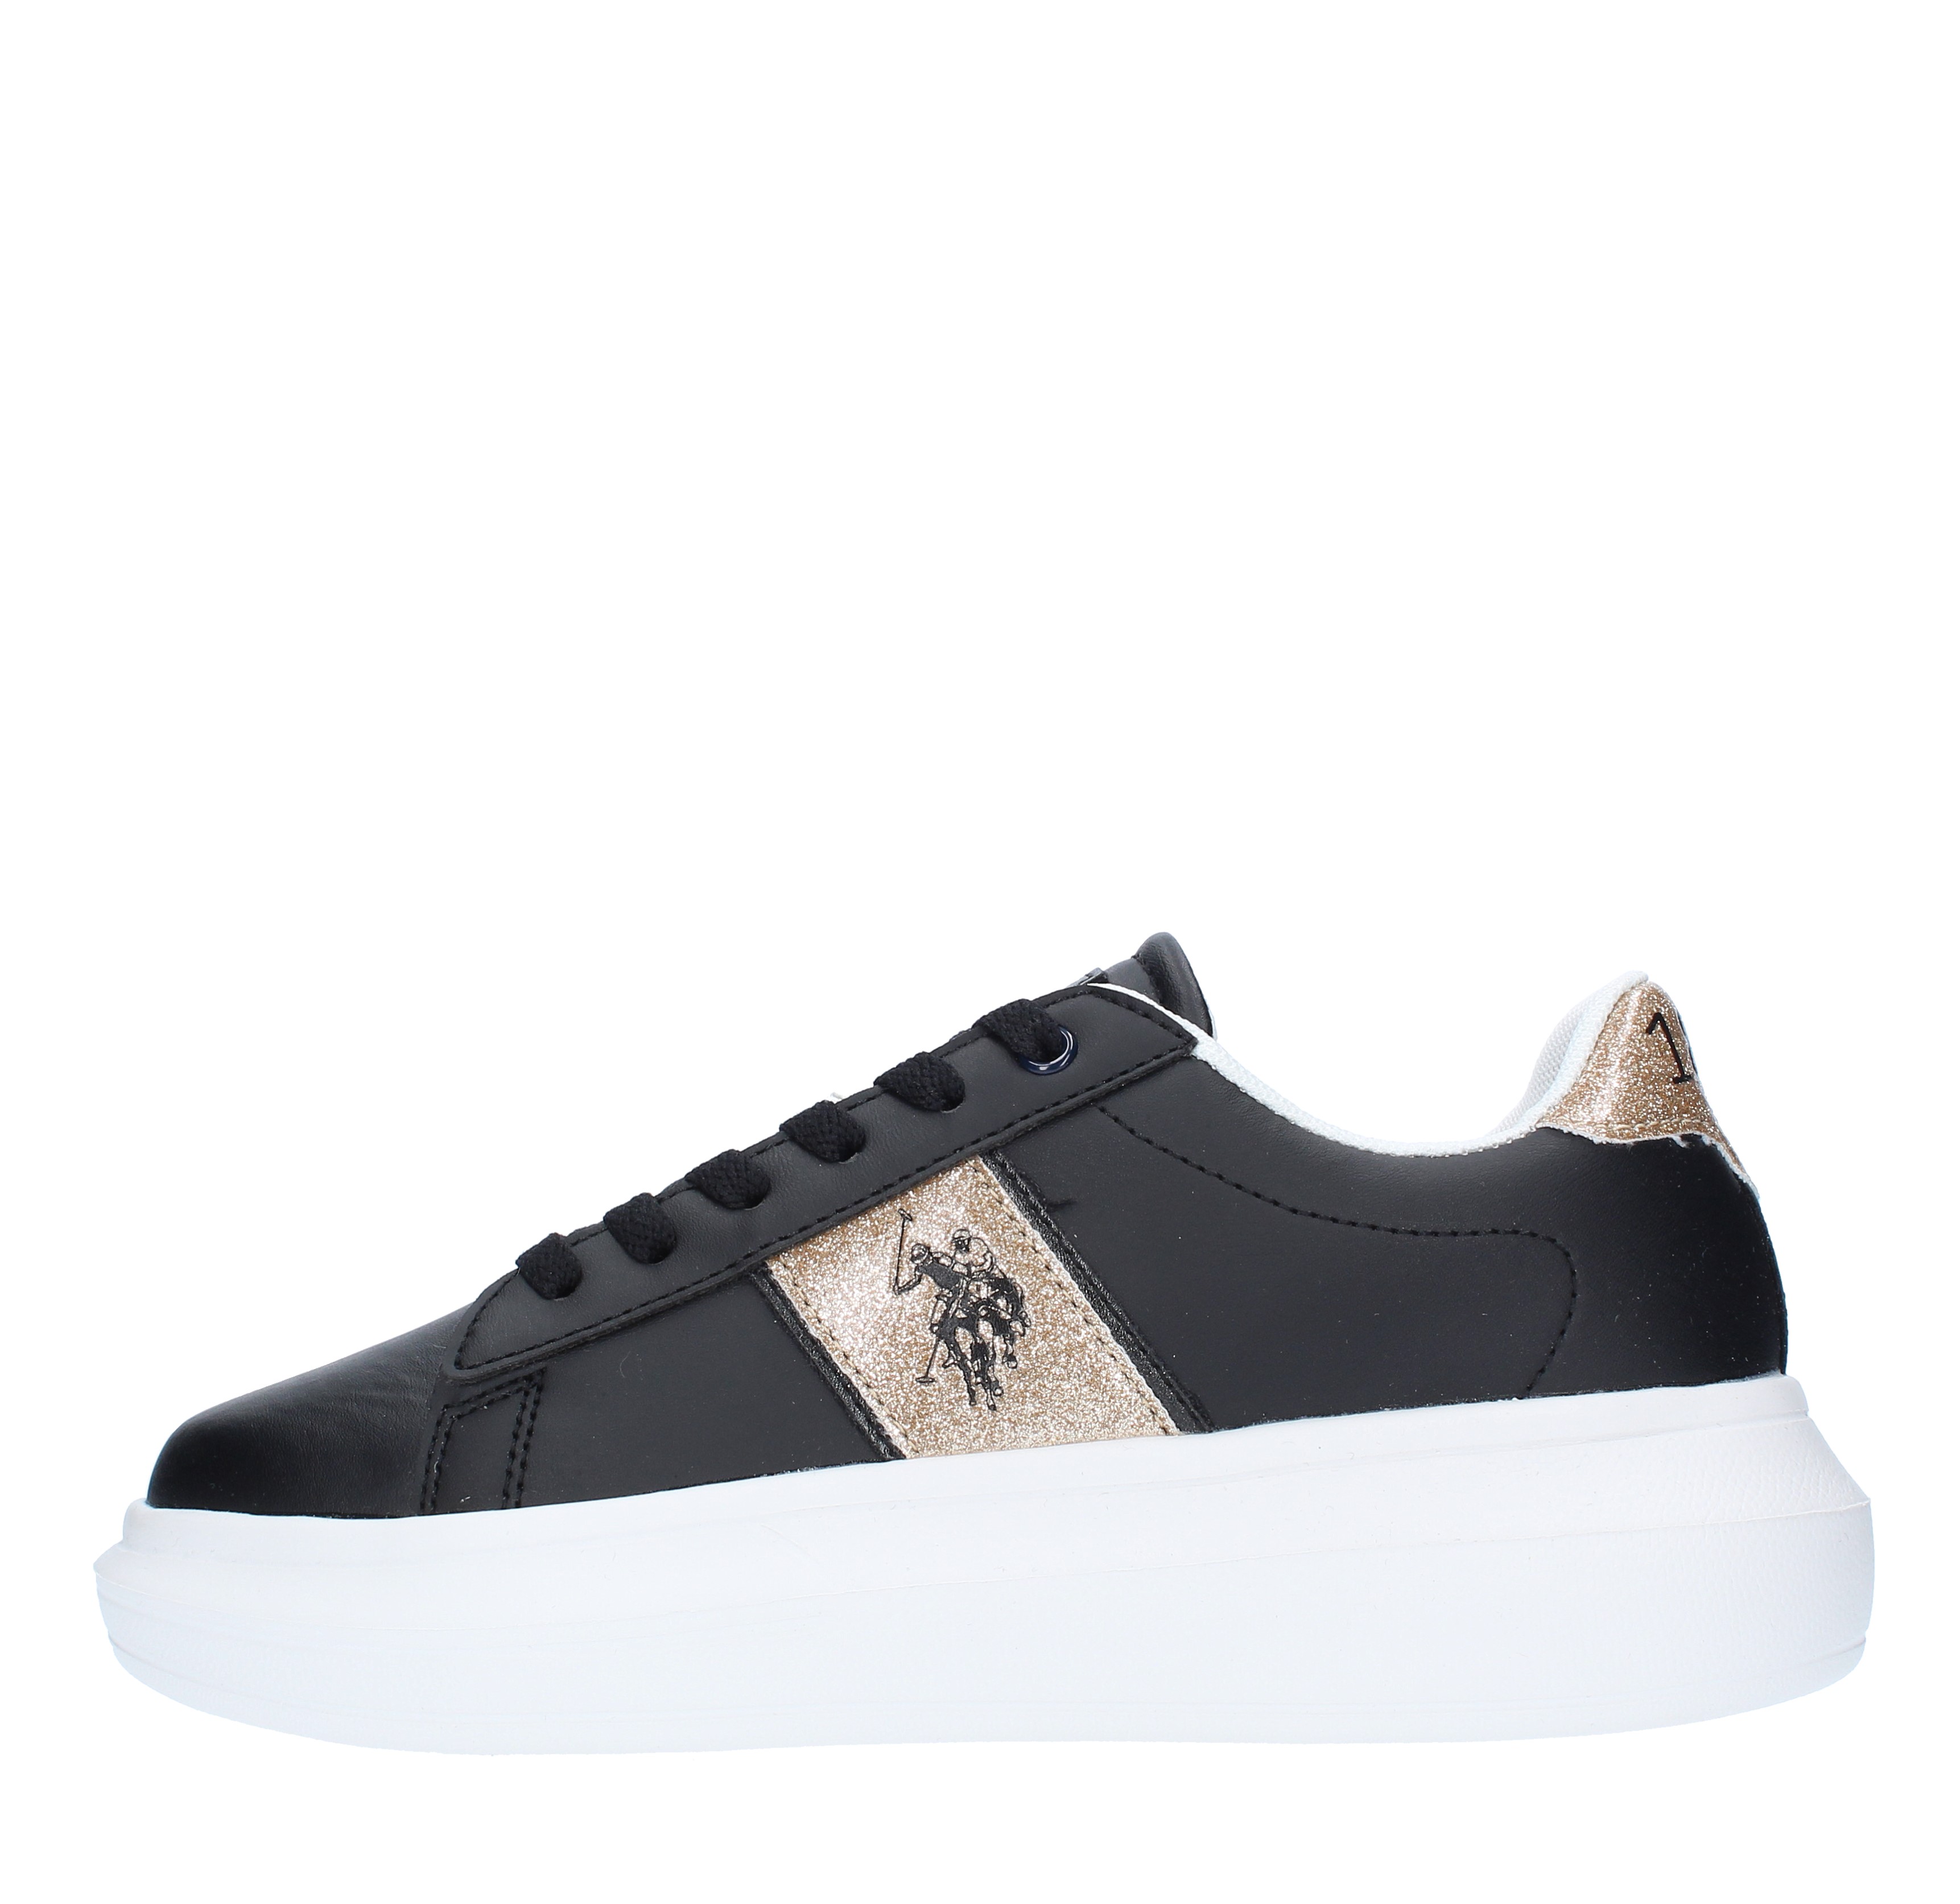 Sneakers in ecopelle - POLO RALPH LAUREN - Ginevra calzature